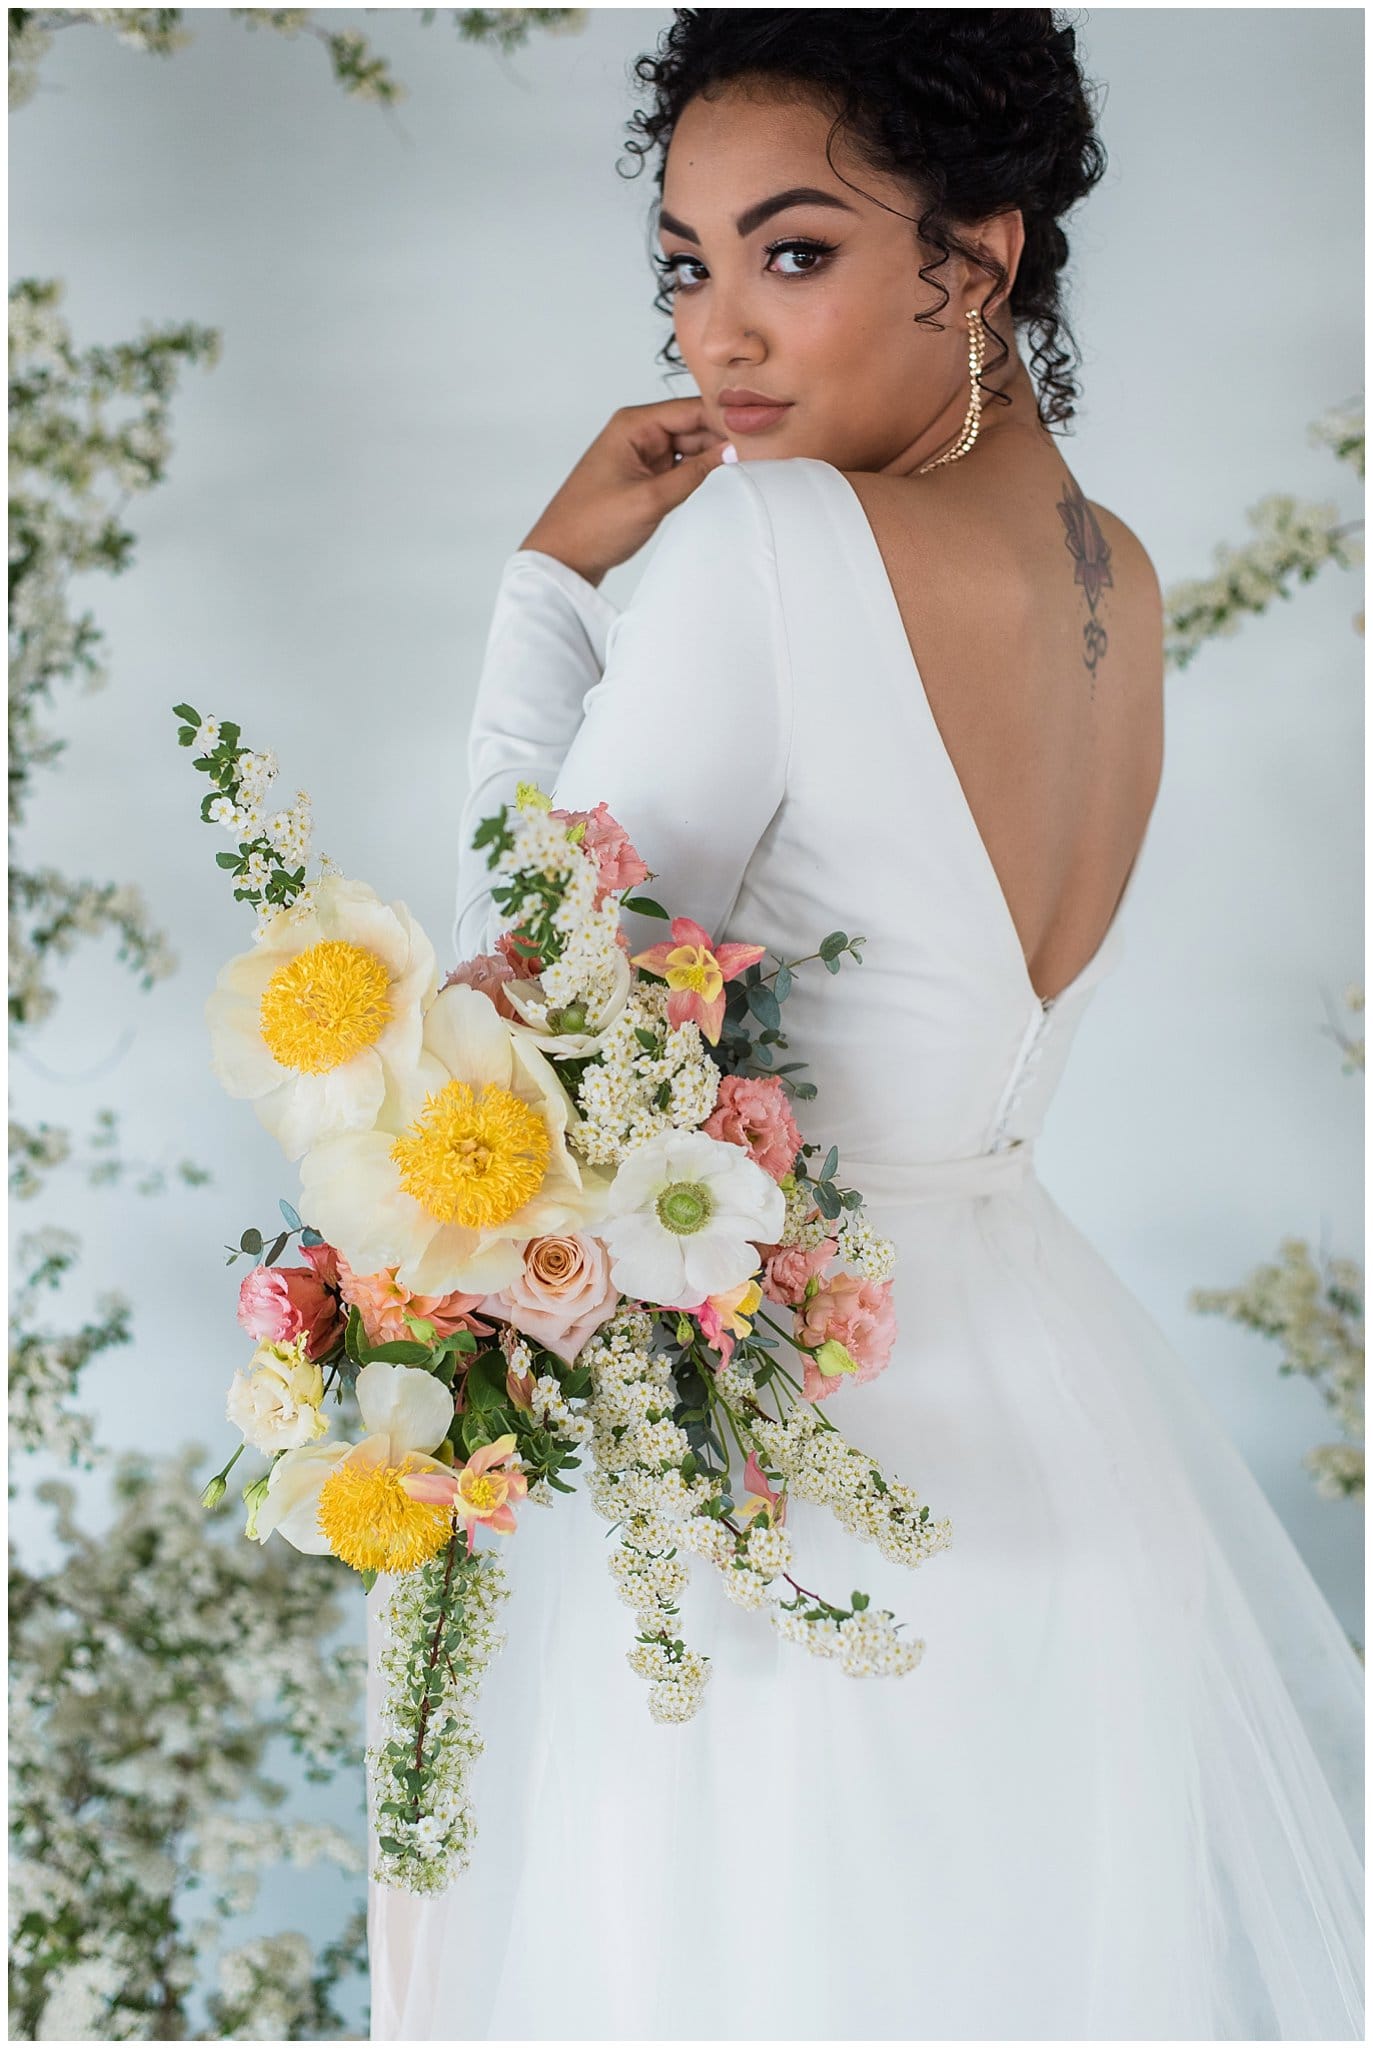 classy colorful bridal bouquet at summer blanc wedding by blanc wedding photographer Jennie Crate photographer